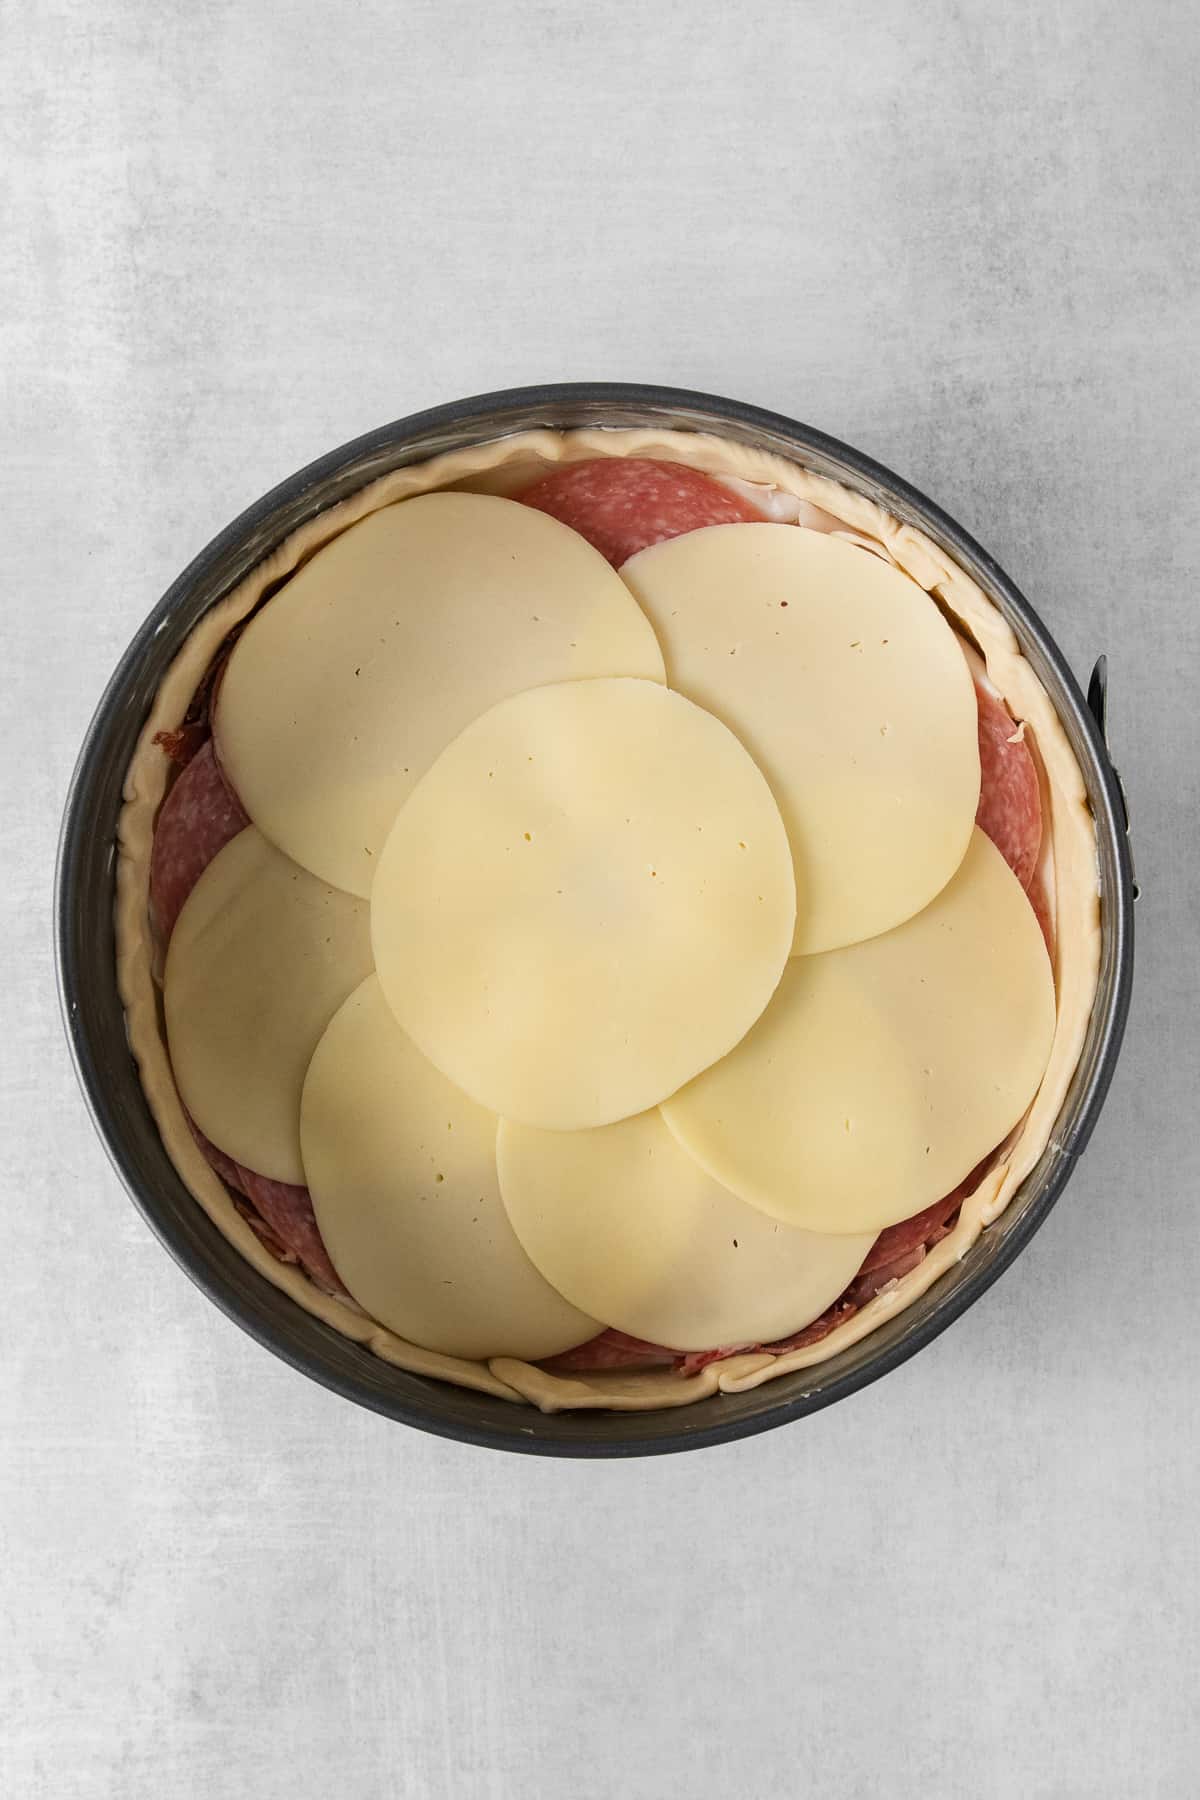 Salami and sliced provolone in a spring form pan.